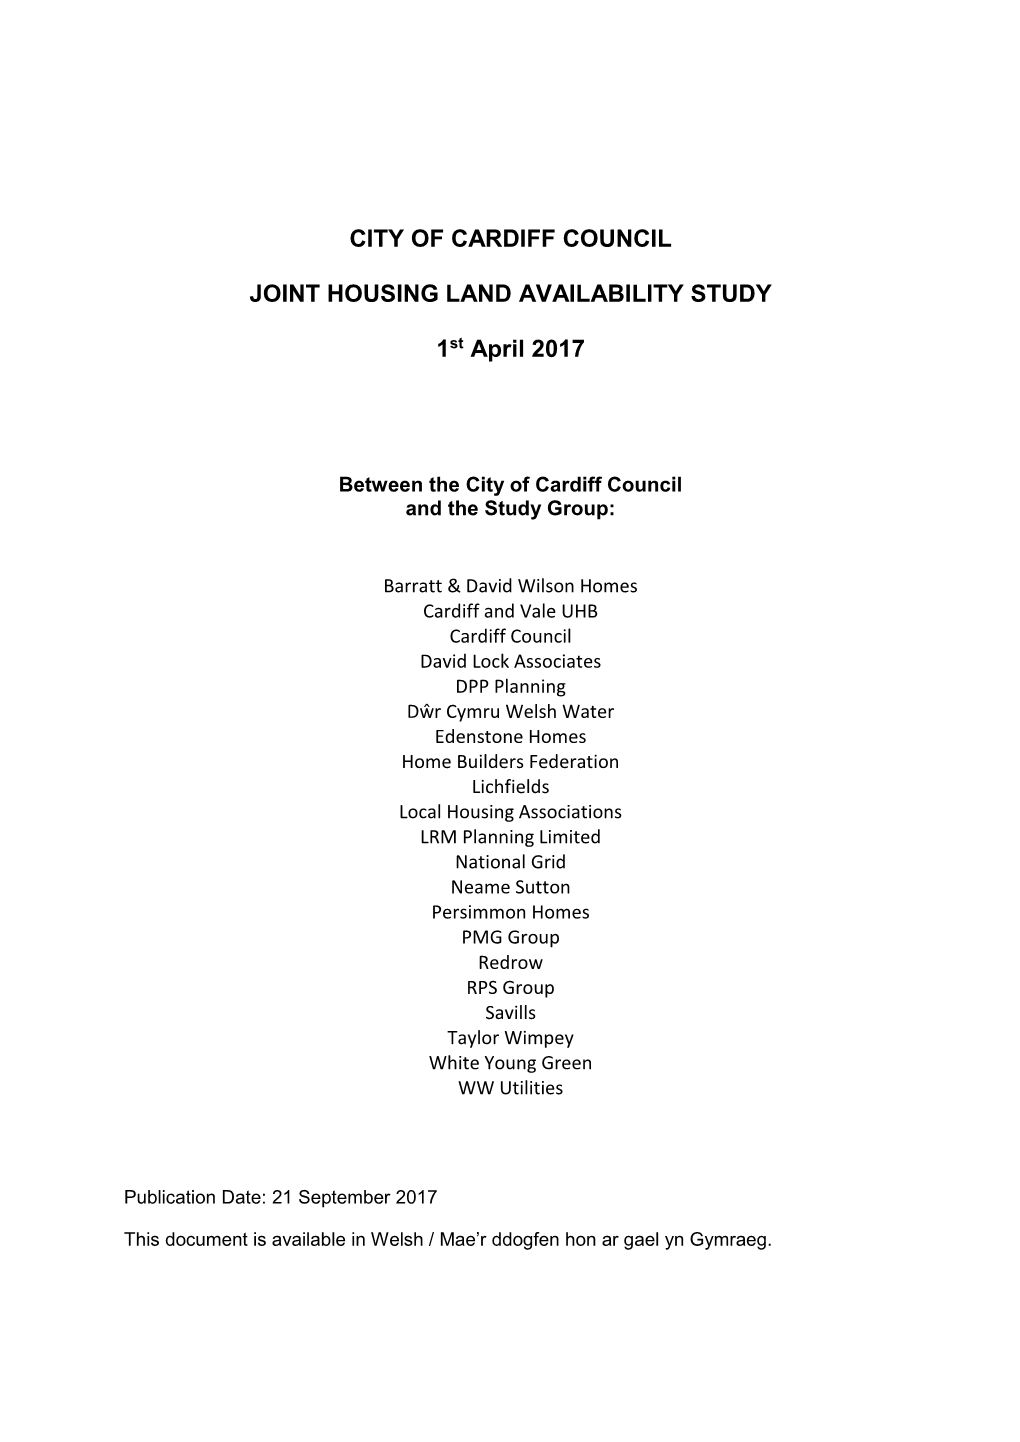 City of Cardiff Council Joint Housing Land Availability